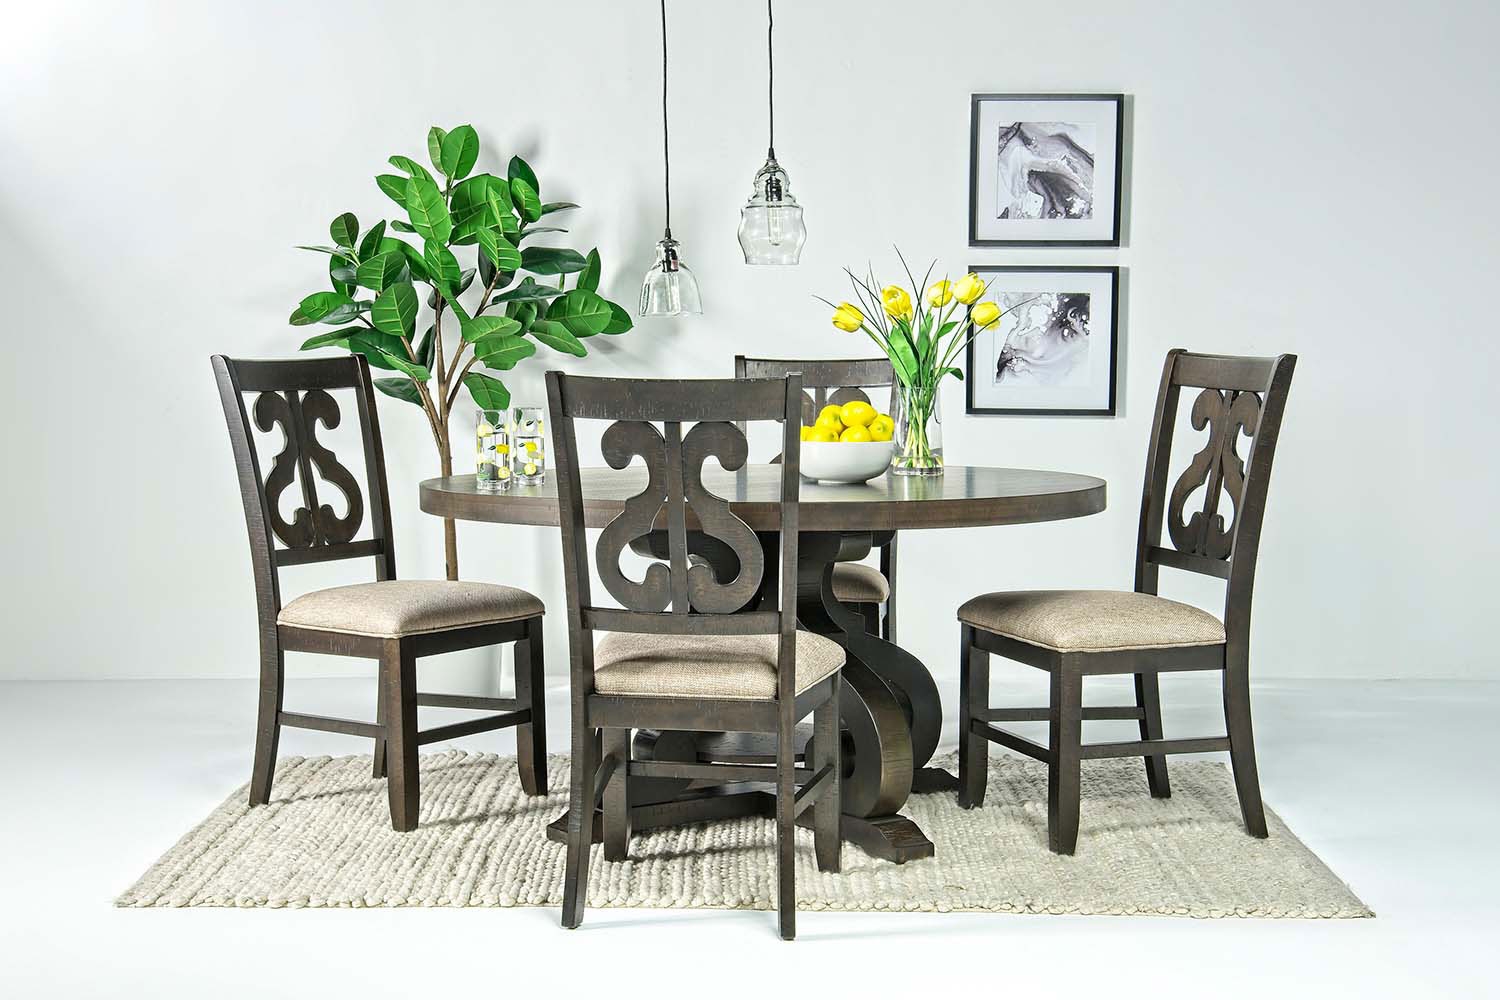 Dining Room Kitchen Chairs Mor, Mor Dining Room Chairs With Arms For Elderly